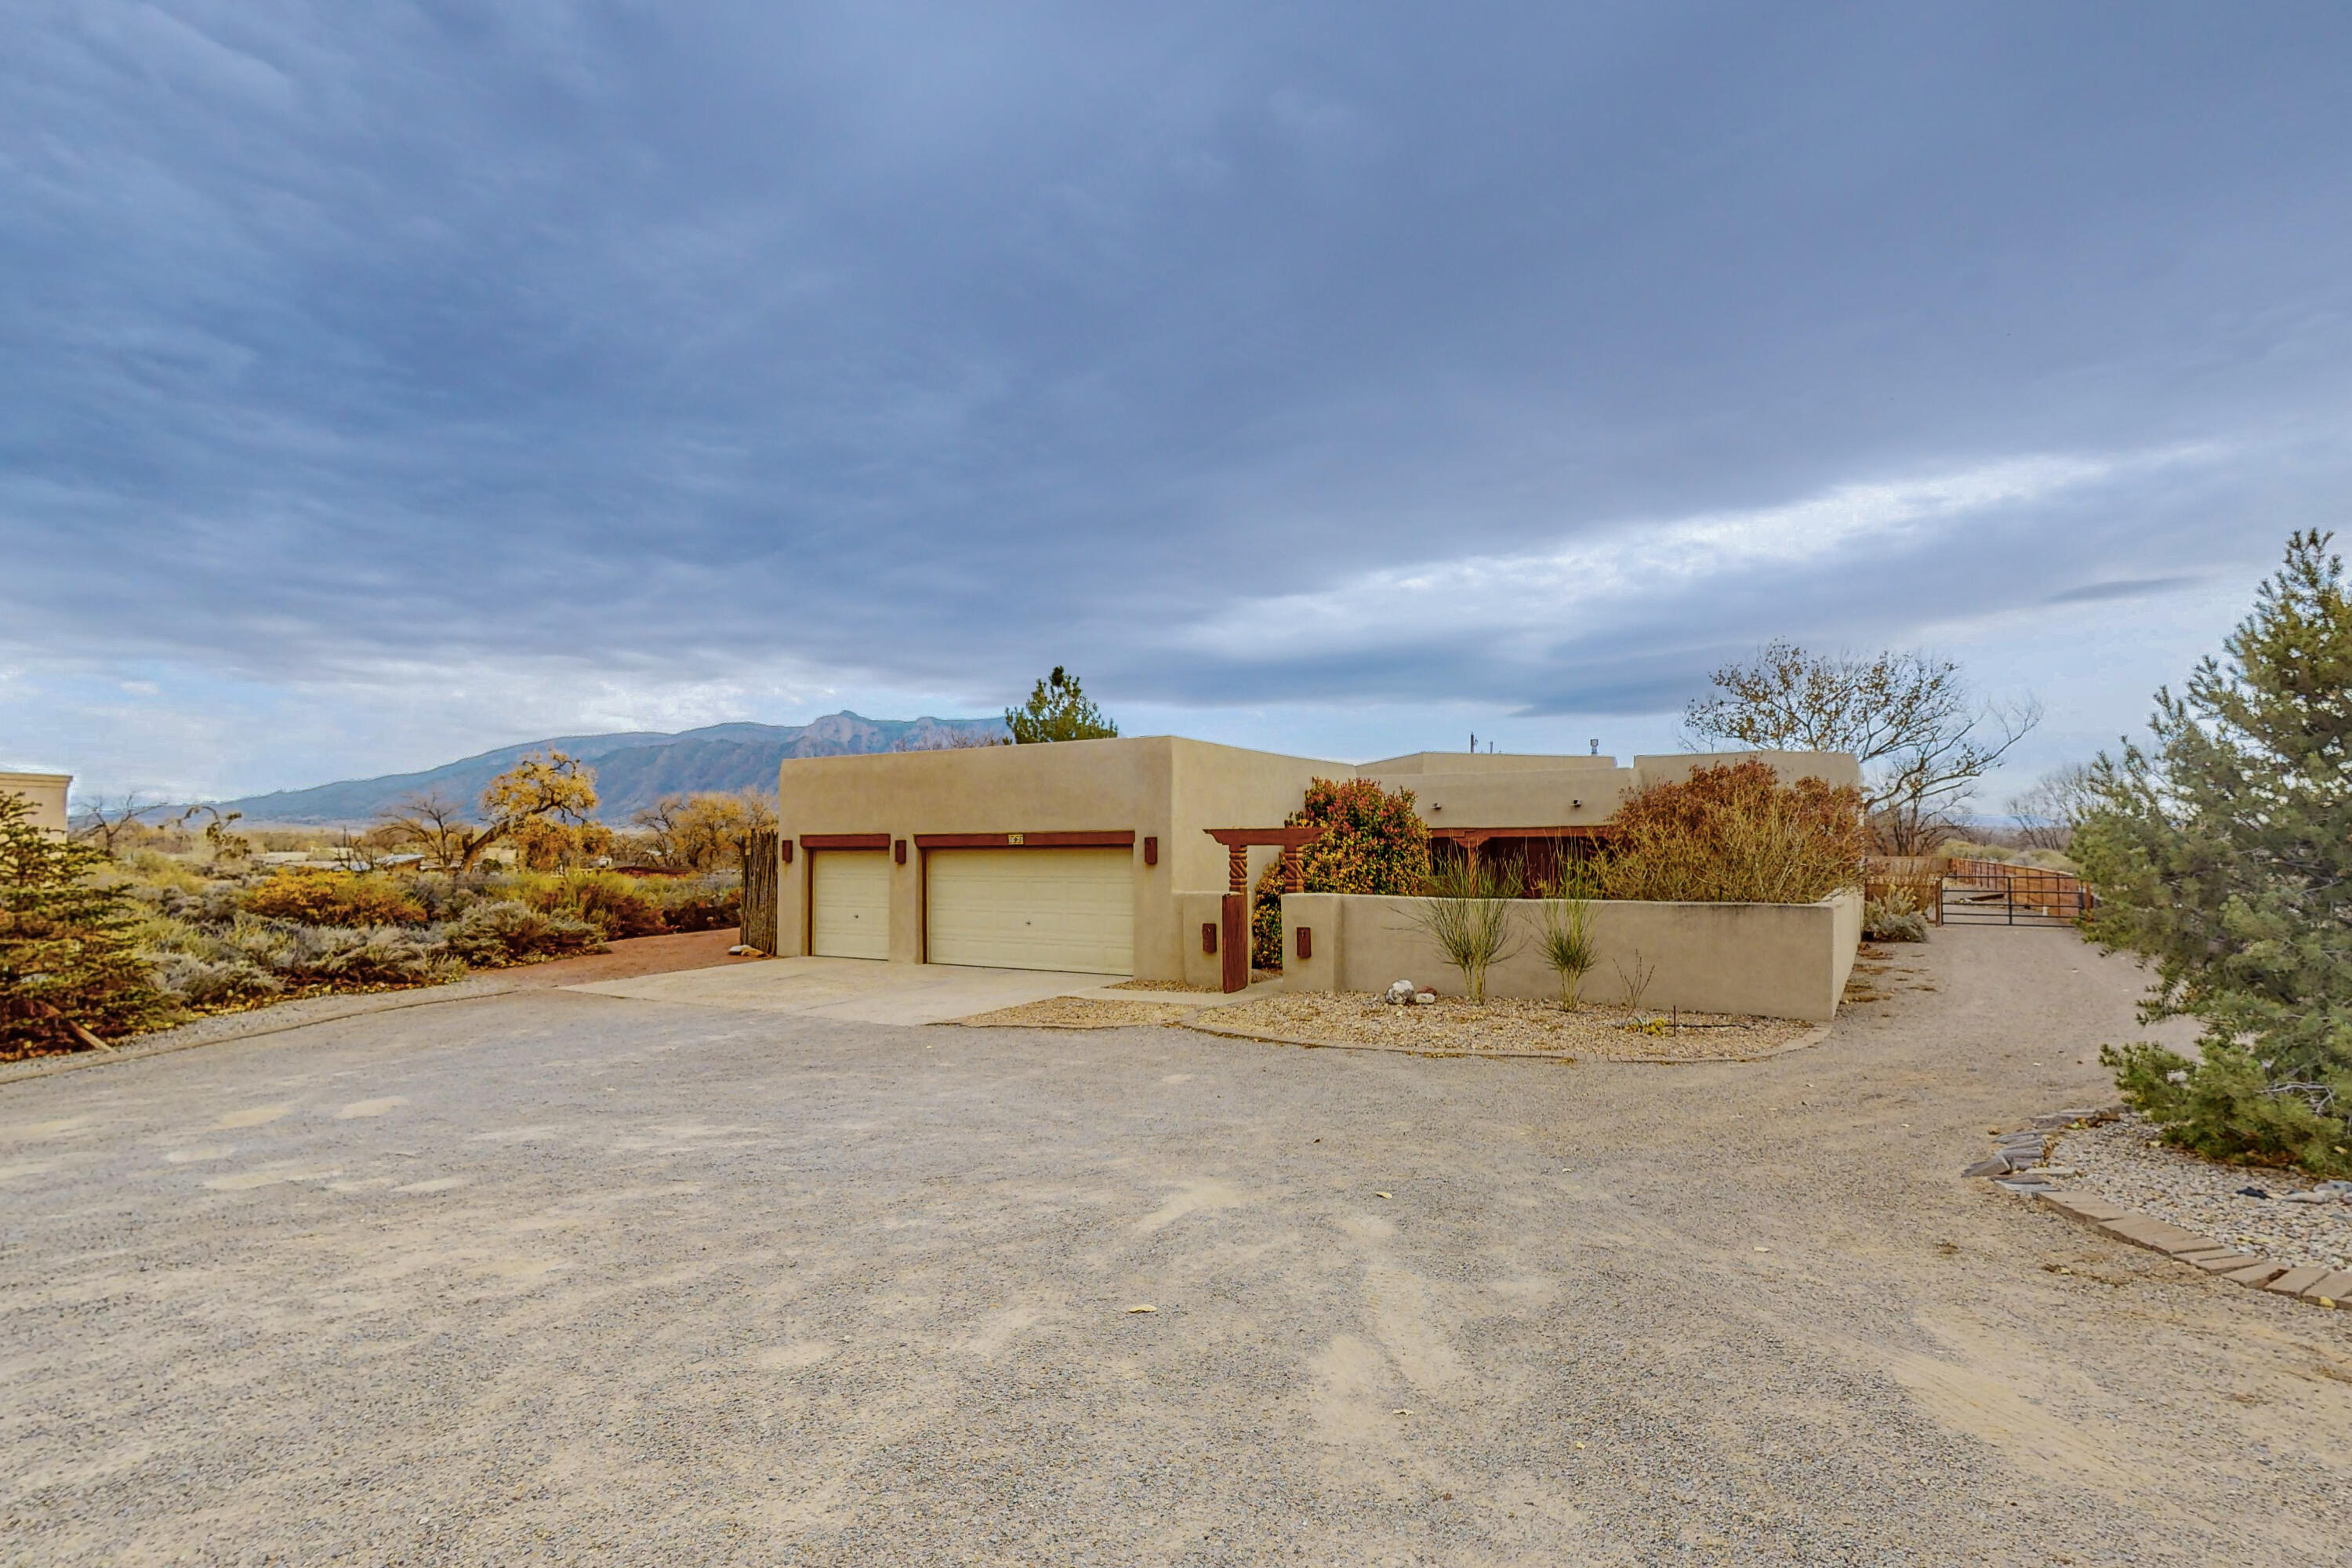 This lovely southwestern style home boasts a spectacular view of the Sandia Mountains unobstructed by any roads or buildings as you look across the tops of the Corrales green belt and enjoy the colors of the 4 seasons from the covered portal that lines the back of the home or from the windows of the spacious spa like master suite (with fireplace and jetted tub) or from the carved pillars. beamed ceiling and cozy gas fireplace of the sunken living area or from the window lined dining room. Located on a private Cul de Sac with 3 other homes, the house itself is very private as no other property is visable from all but the kitchen, which looks out on the beautifully landscaped entry. This home has beautiful flooring and newer windows with  wood blinds thru out. It is spectacular! Come see it!